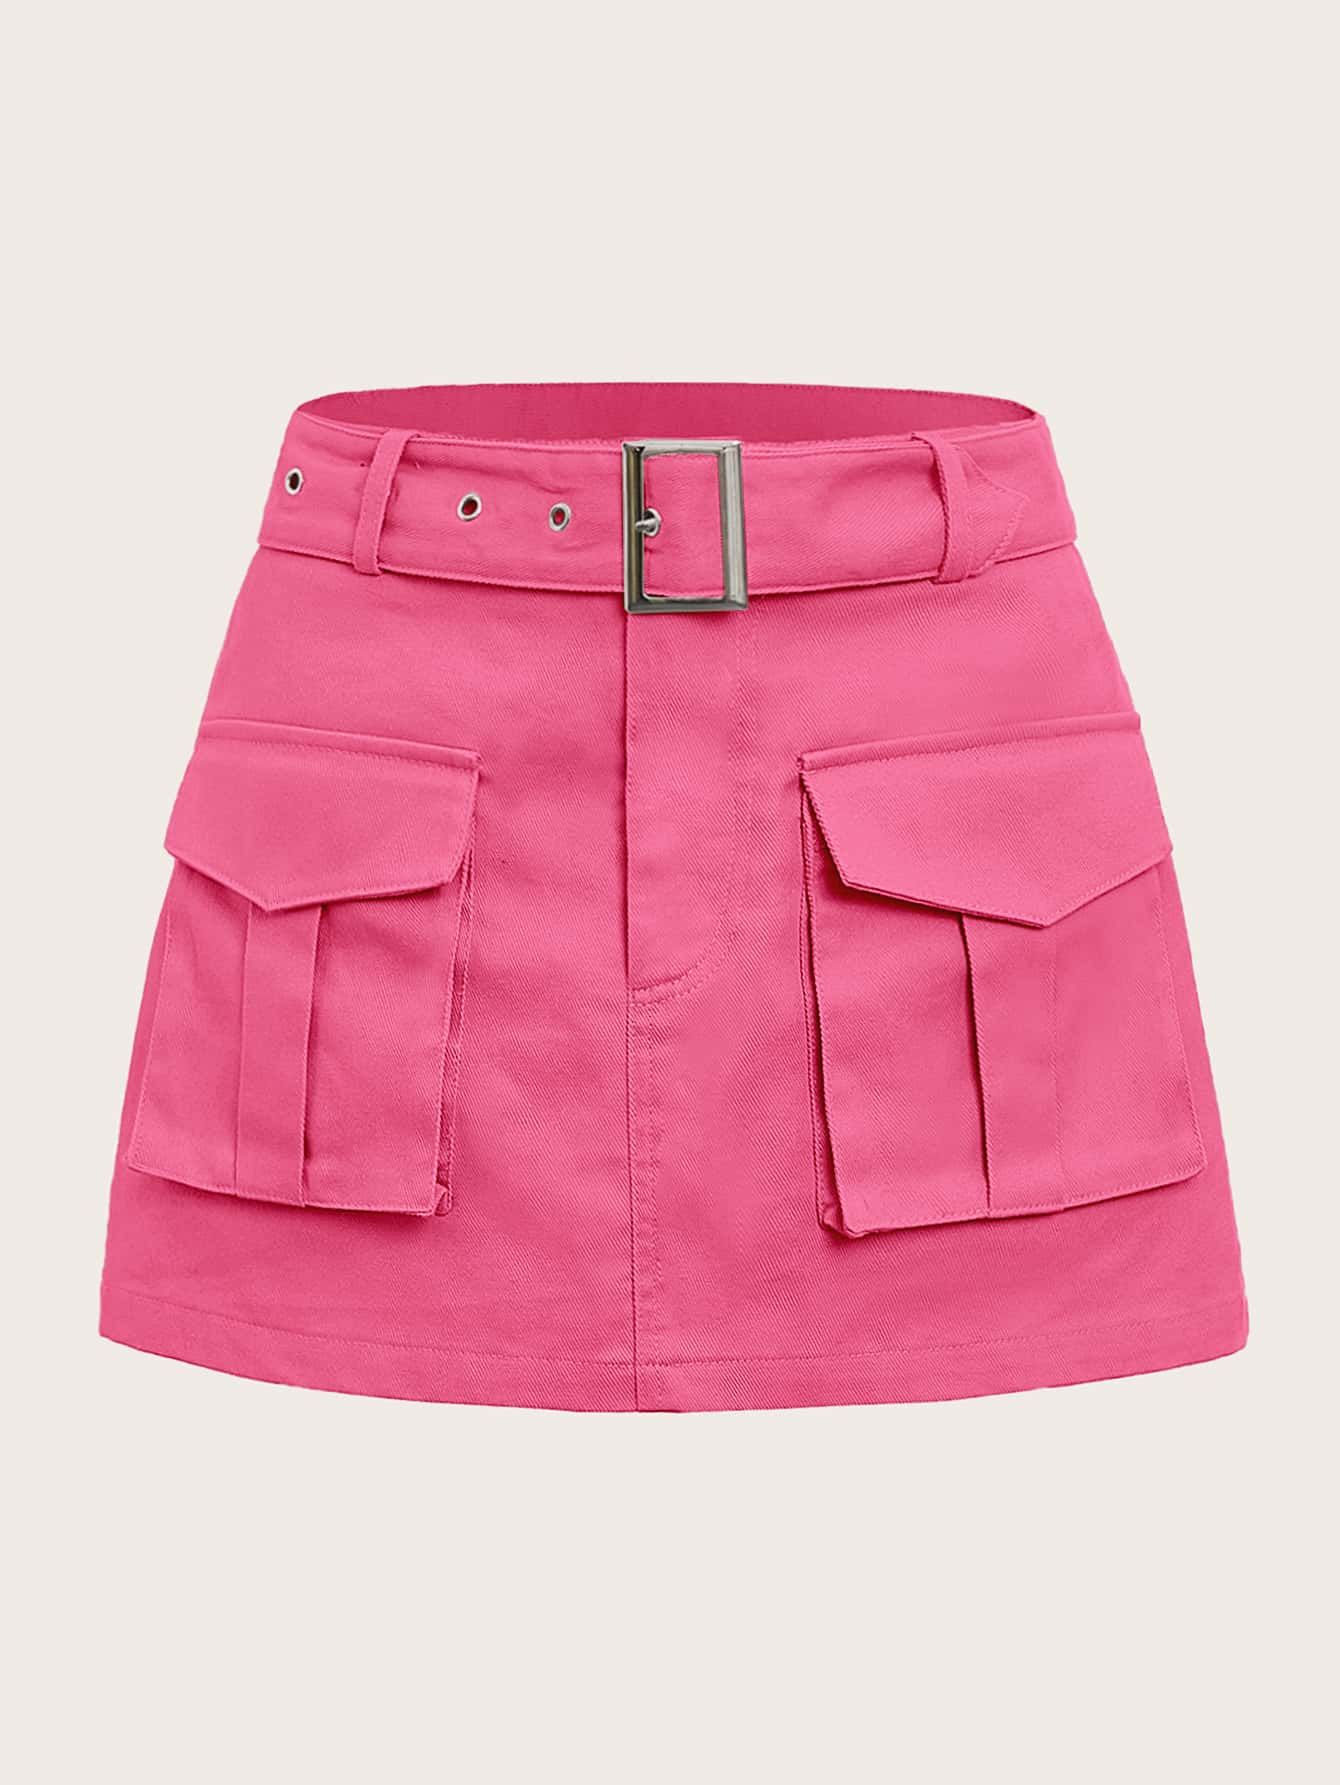 Get a pink skirt for your wardrobe